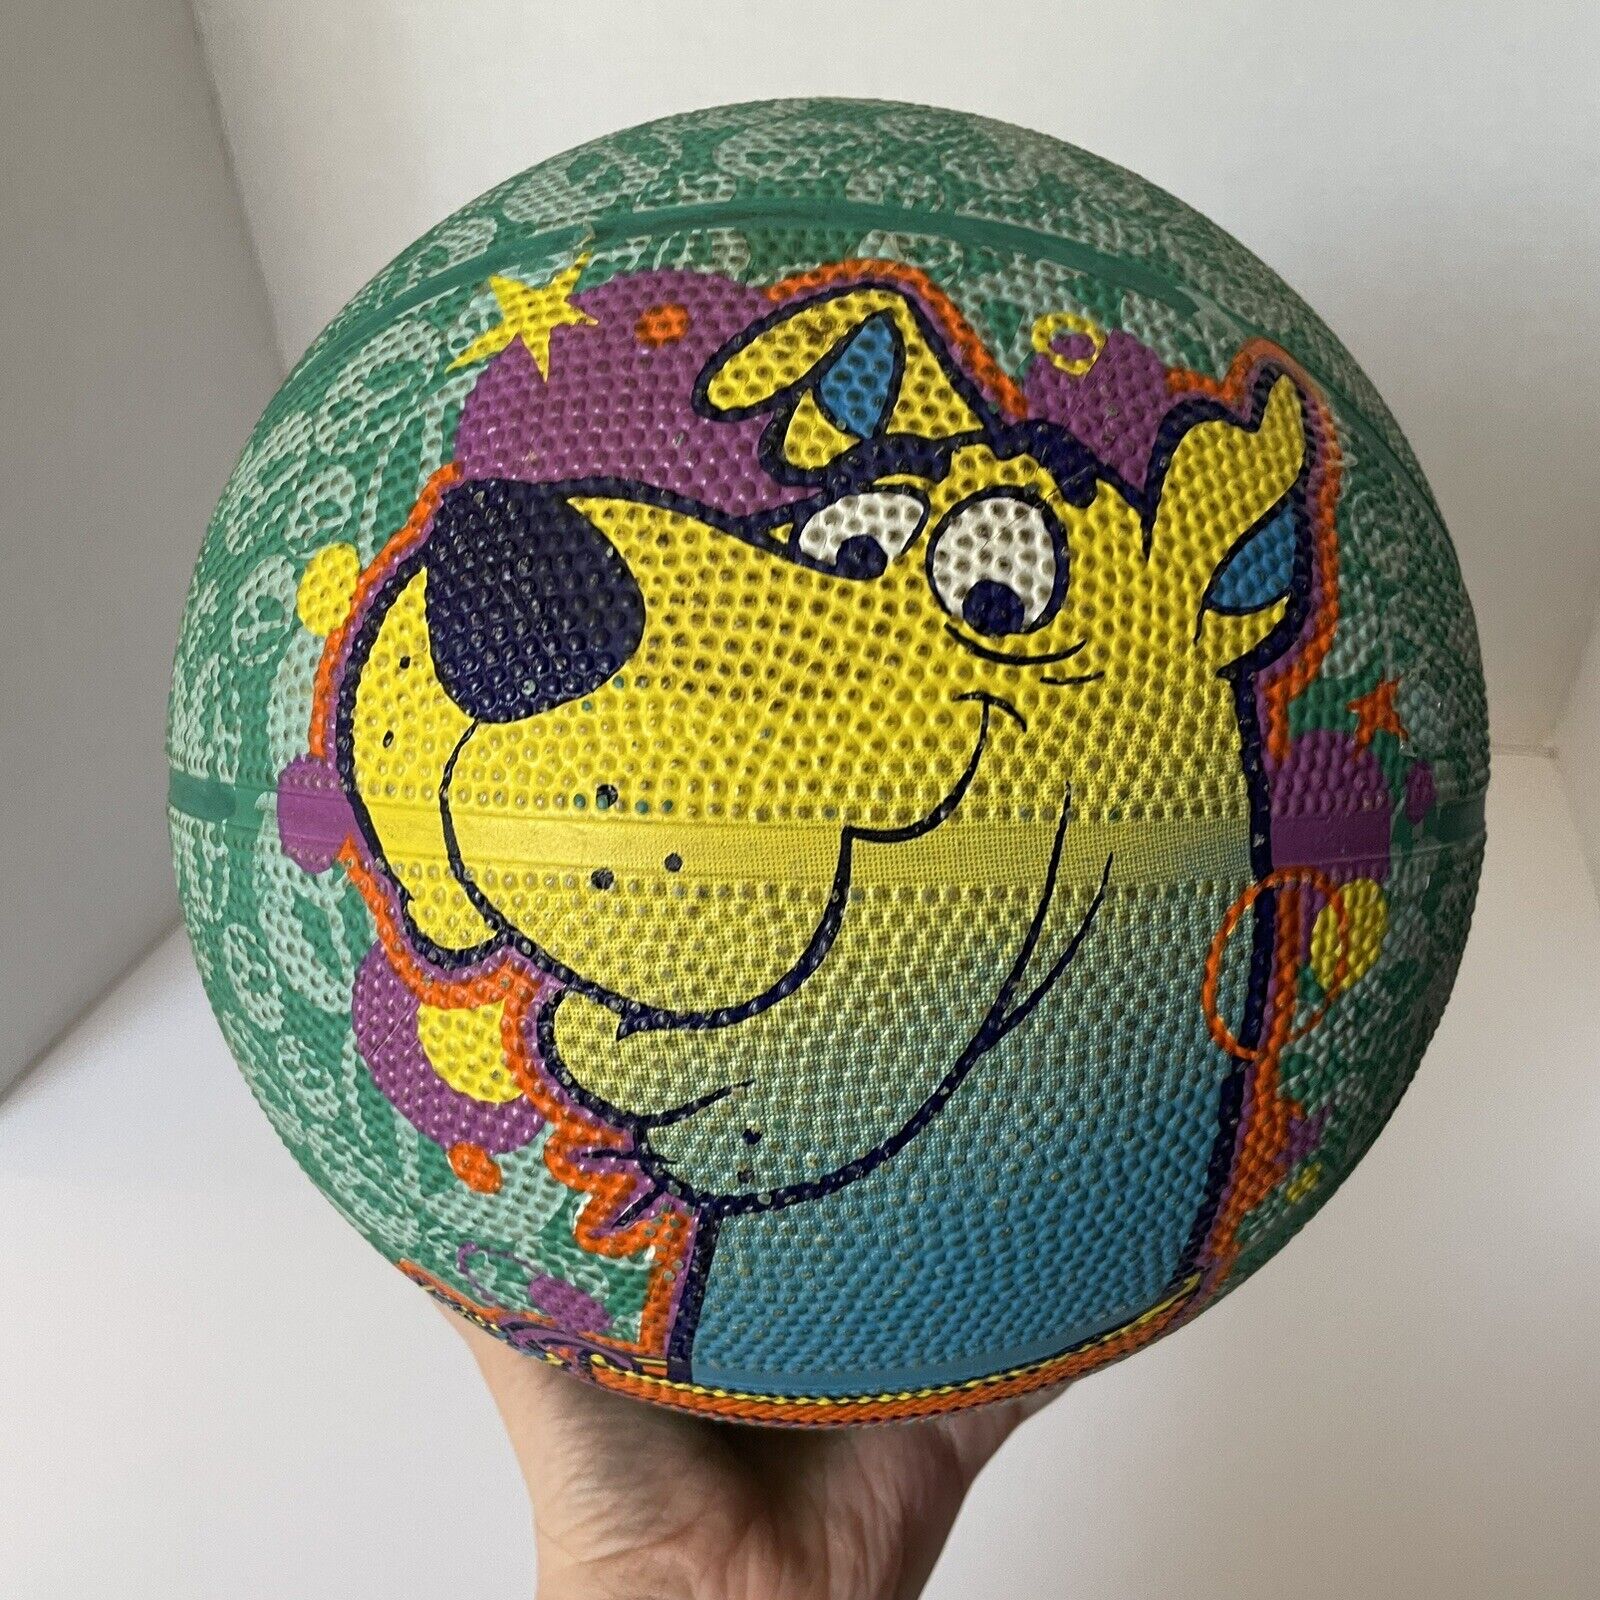 Vtg Hanna Barbera 1998 Scooby Doo Basketball Full Size Blue Colorful psychedelic